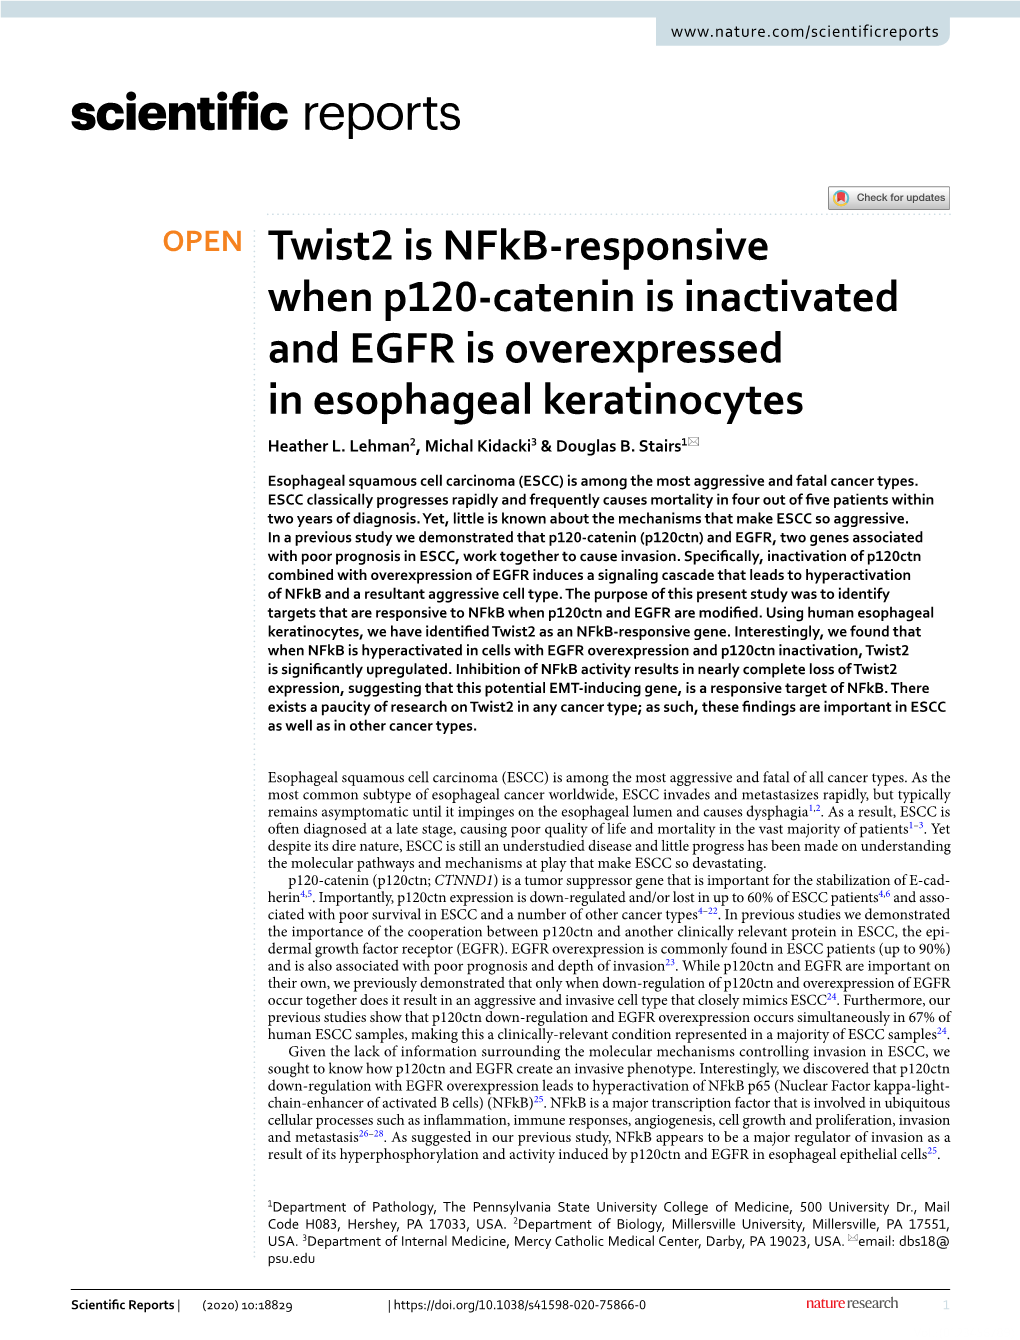 Twist2 Is Nfkb-Responsive When P120-Catenin Is Inactivated and EGFR Is